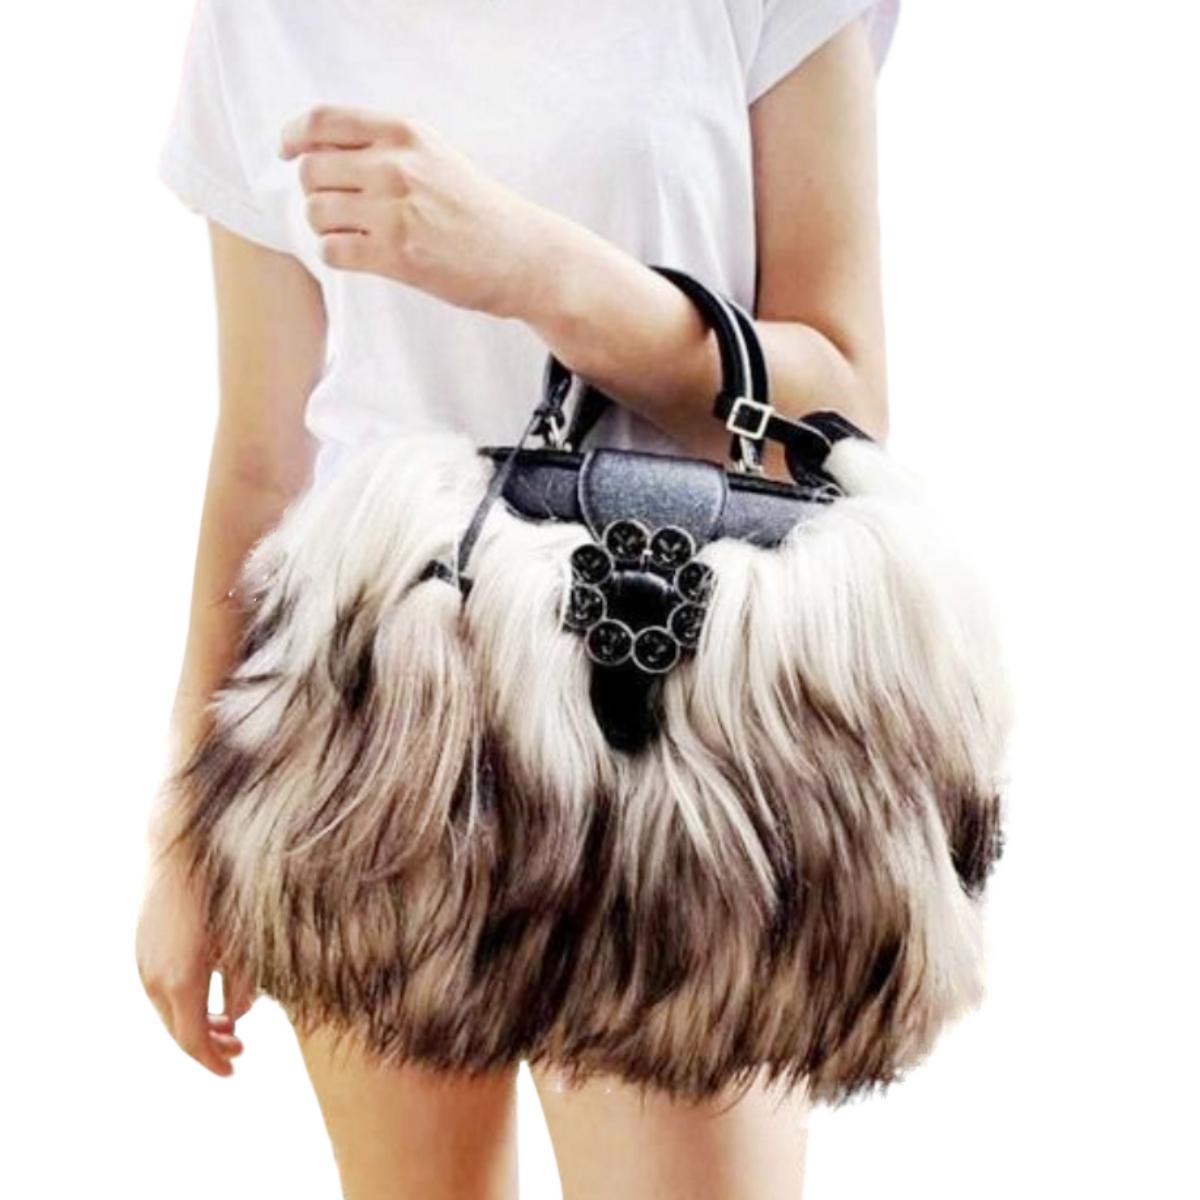 Louis Vuitton Limited Edition Transsiberian Goat Hair Tote Bag

- Limited Edition from 2012-2013 Winter Fall
- Dip-dyed long hair goat fur and grained leather
- Inspired by the Transsiberian Railway that connects Moscow to the Russian Far East and